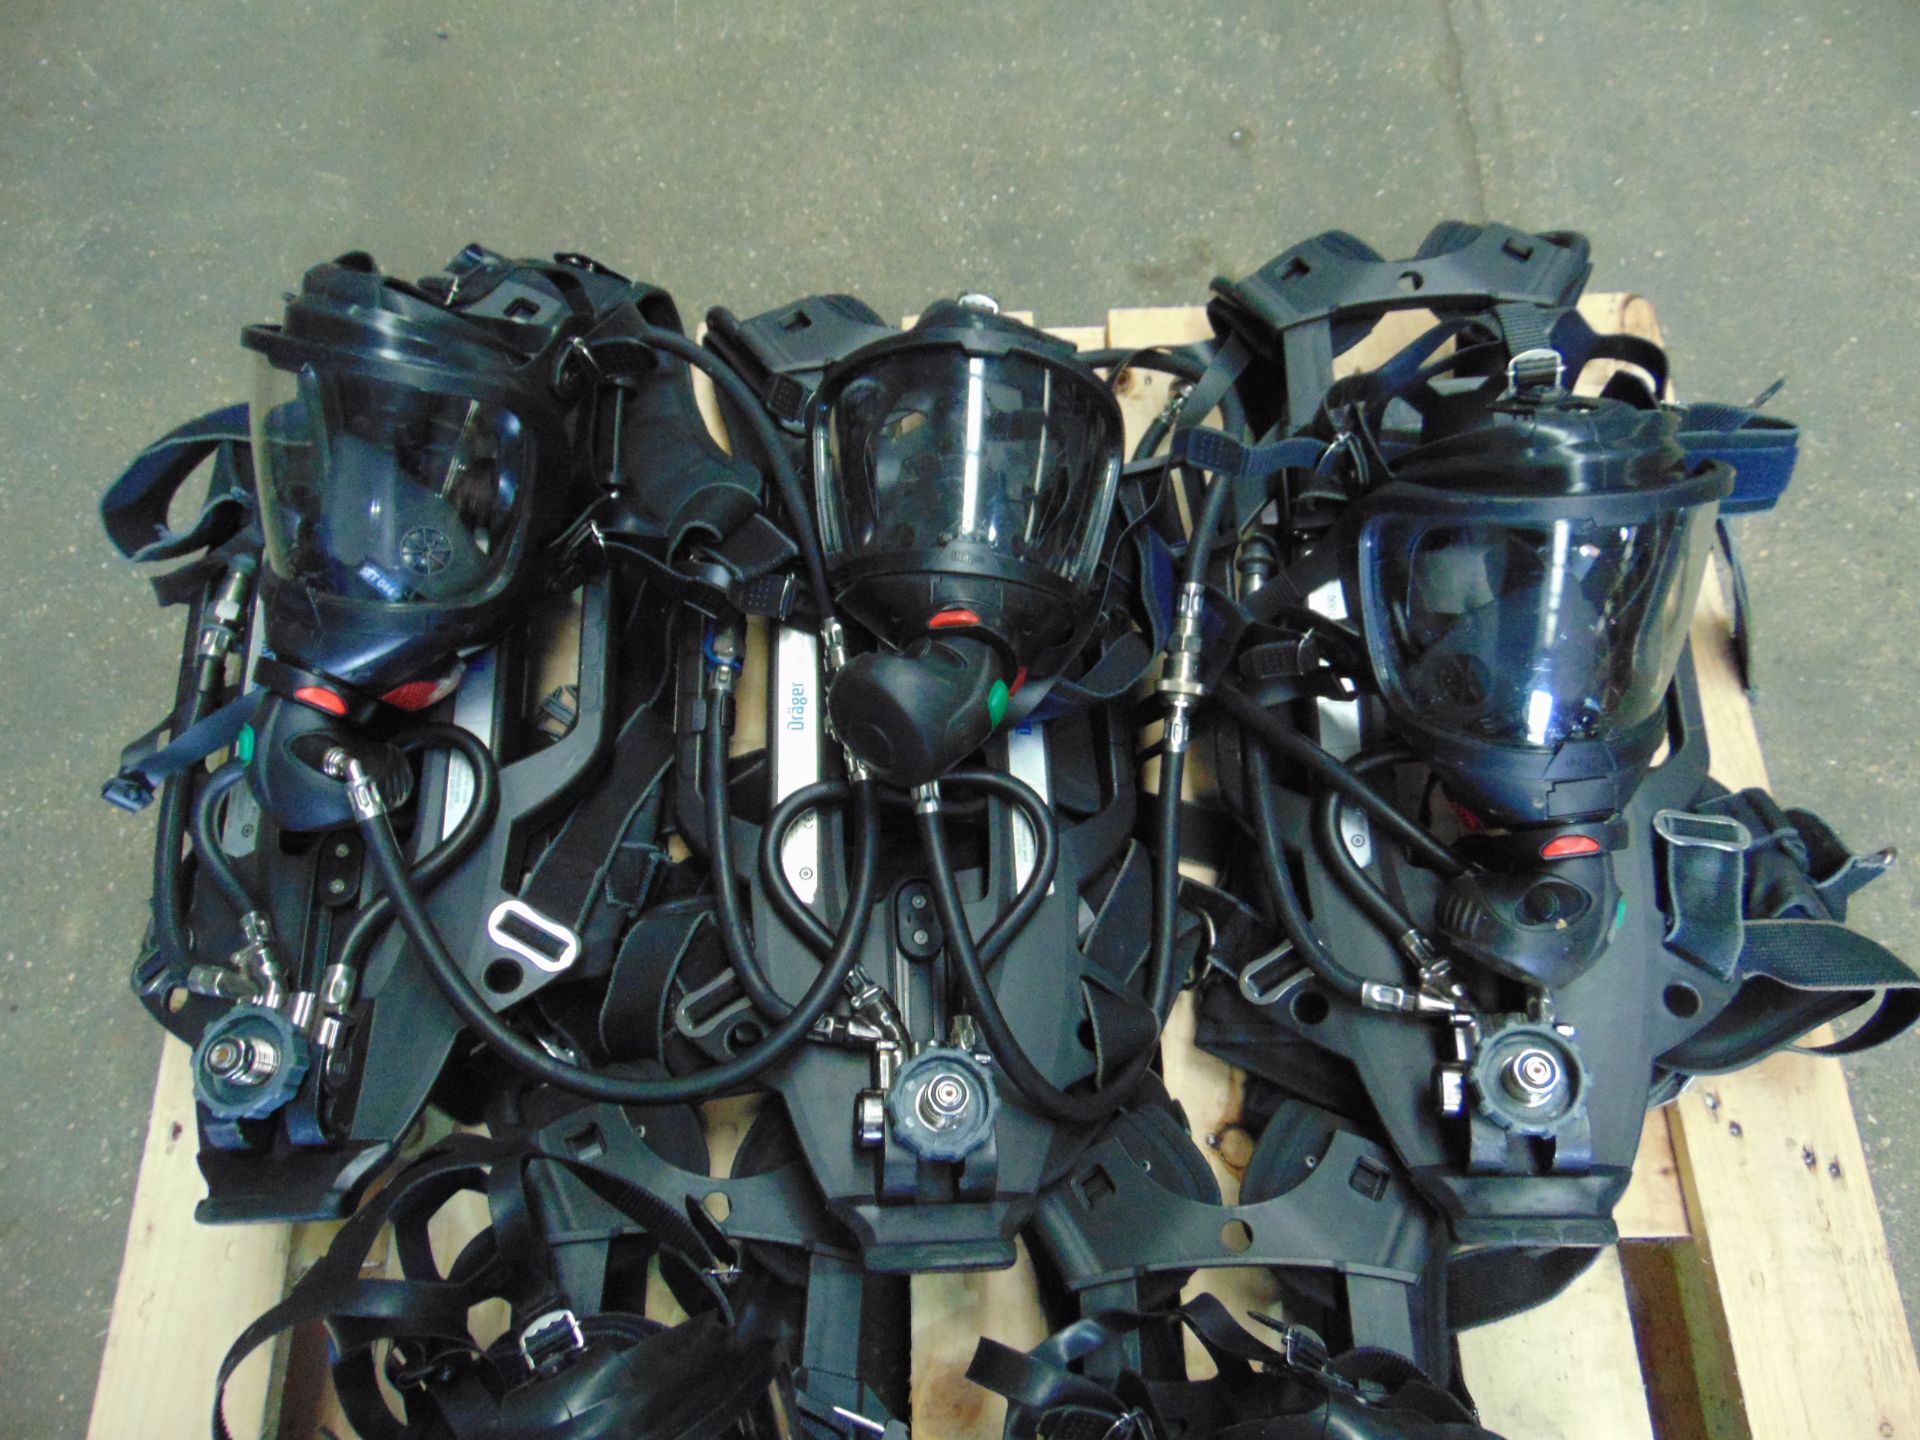 5 x Drager PSS 7000 Self Contained Breathing Apparatus w/ 10 x Drager 300 Bar Air Cylinders - Image 10 of 21